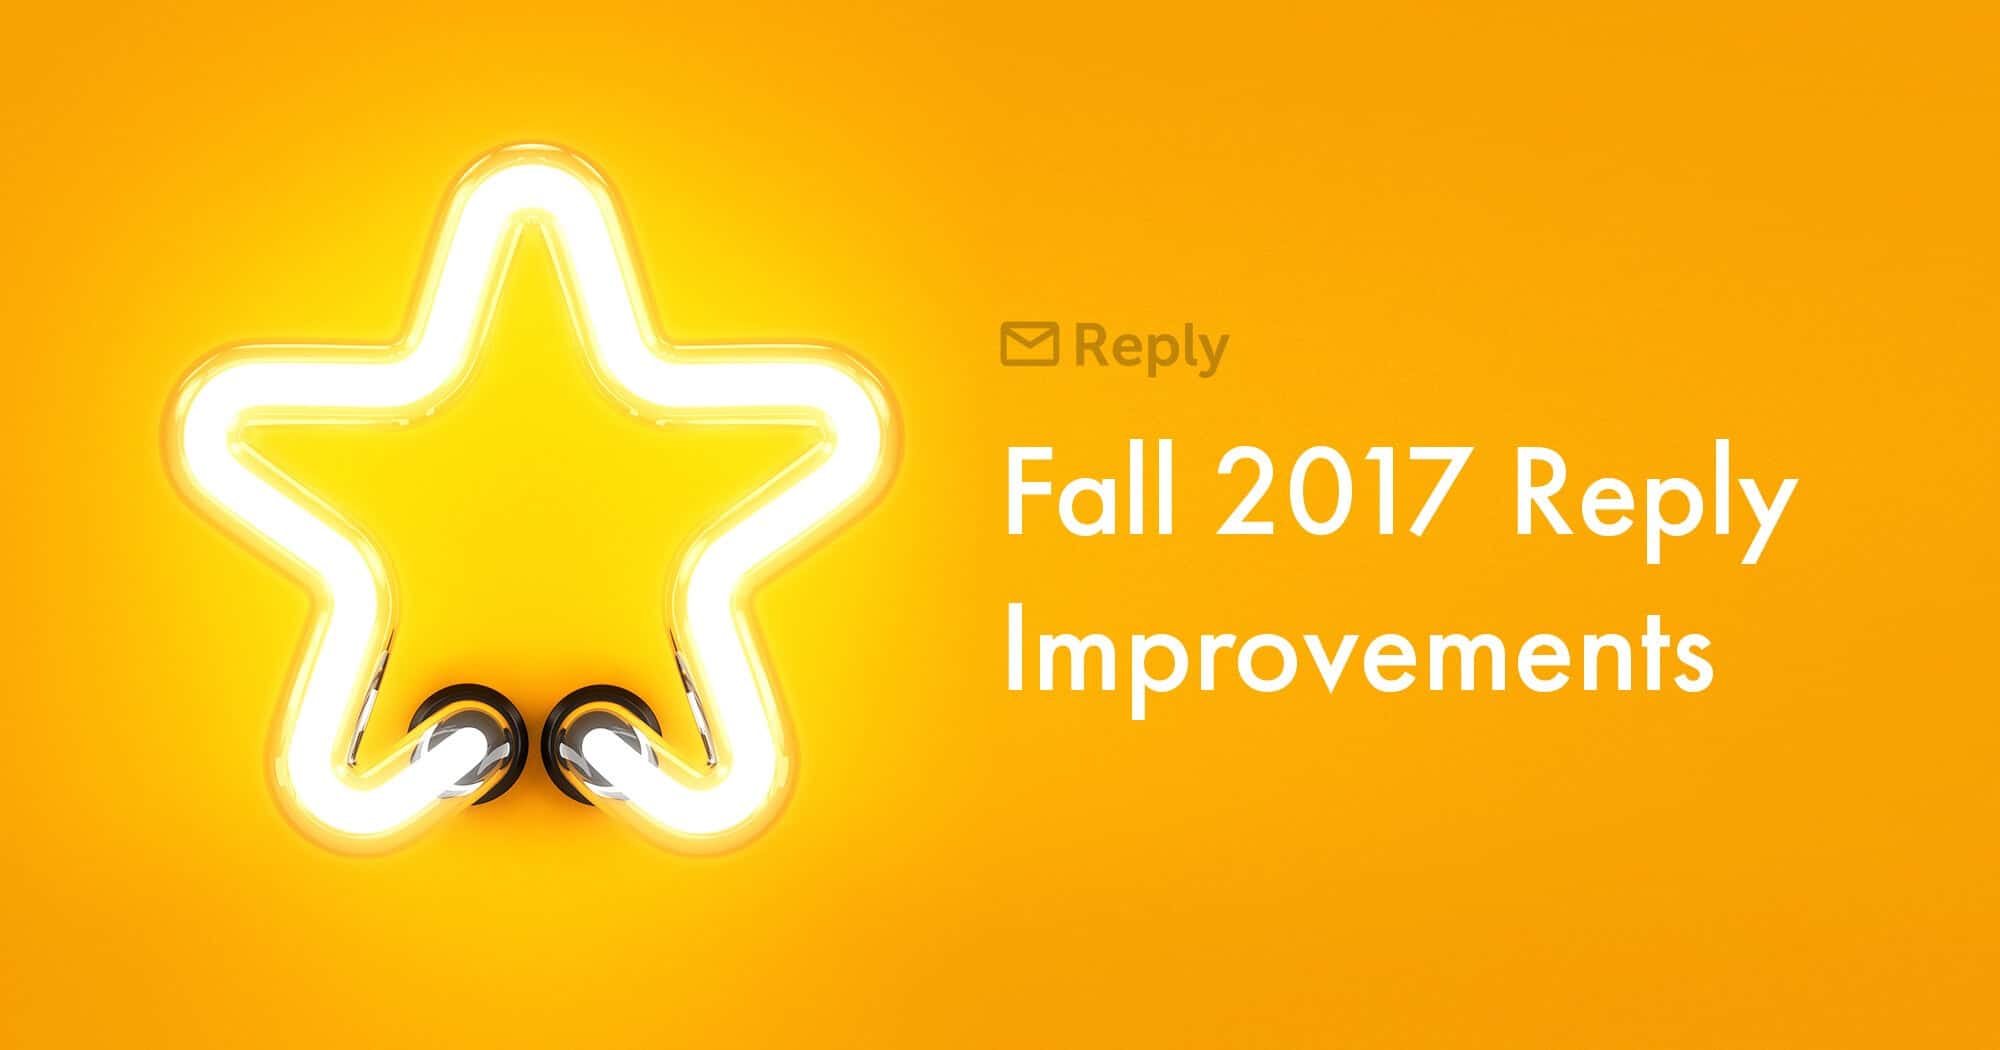 star pic for Fall 2017 Reply Improvements